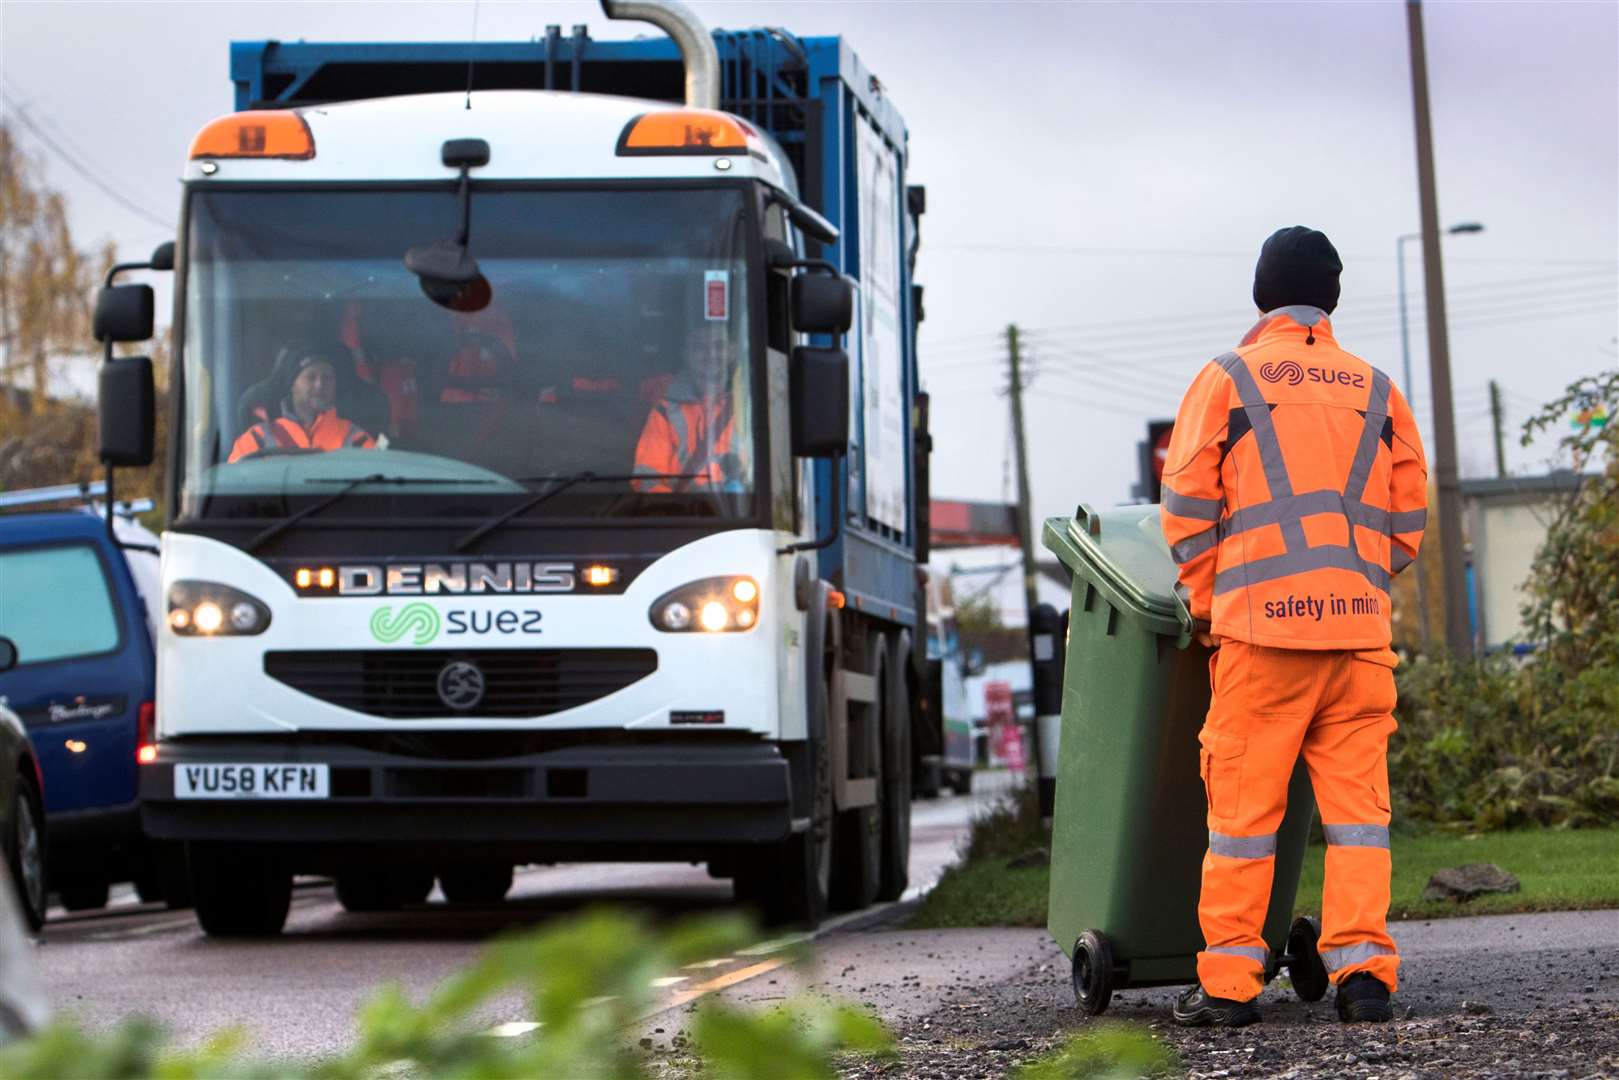 Maidstone, Swale and Ashford councils’ waste contractor Suez is under fire. Picture: Suez